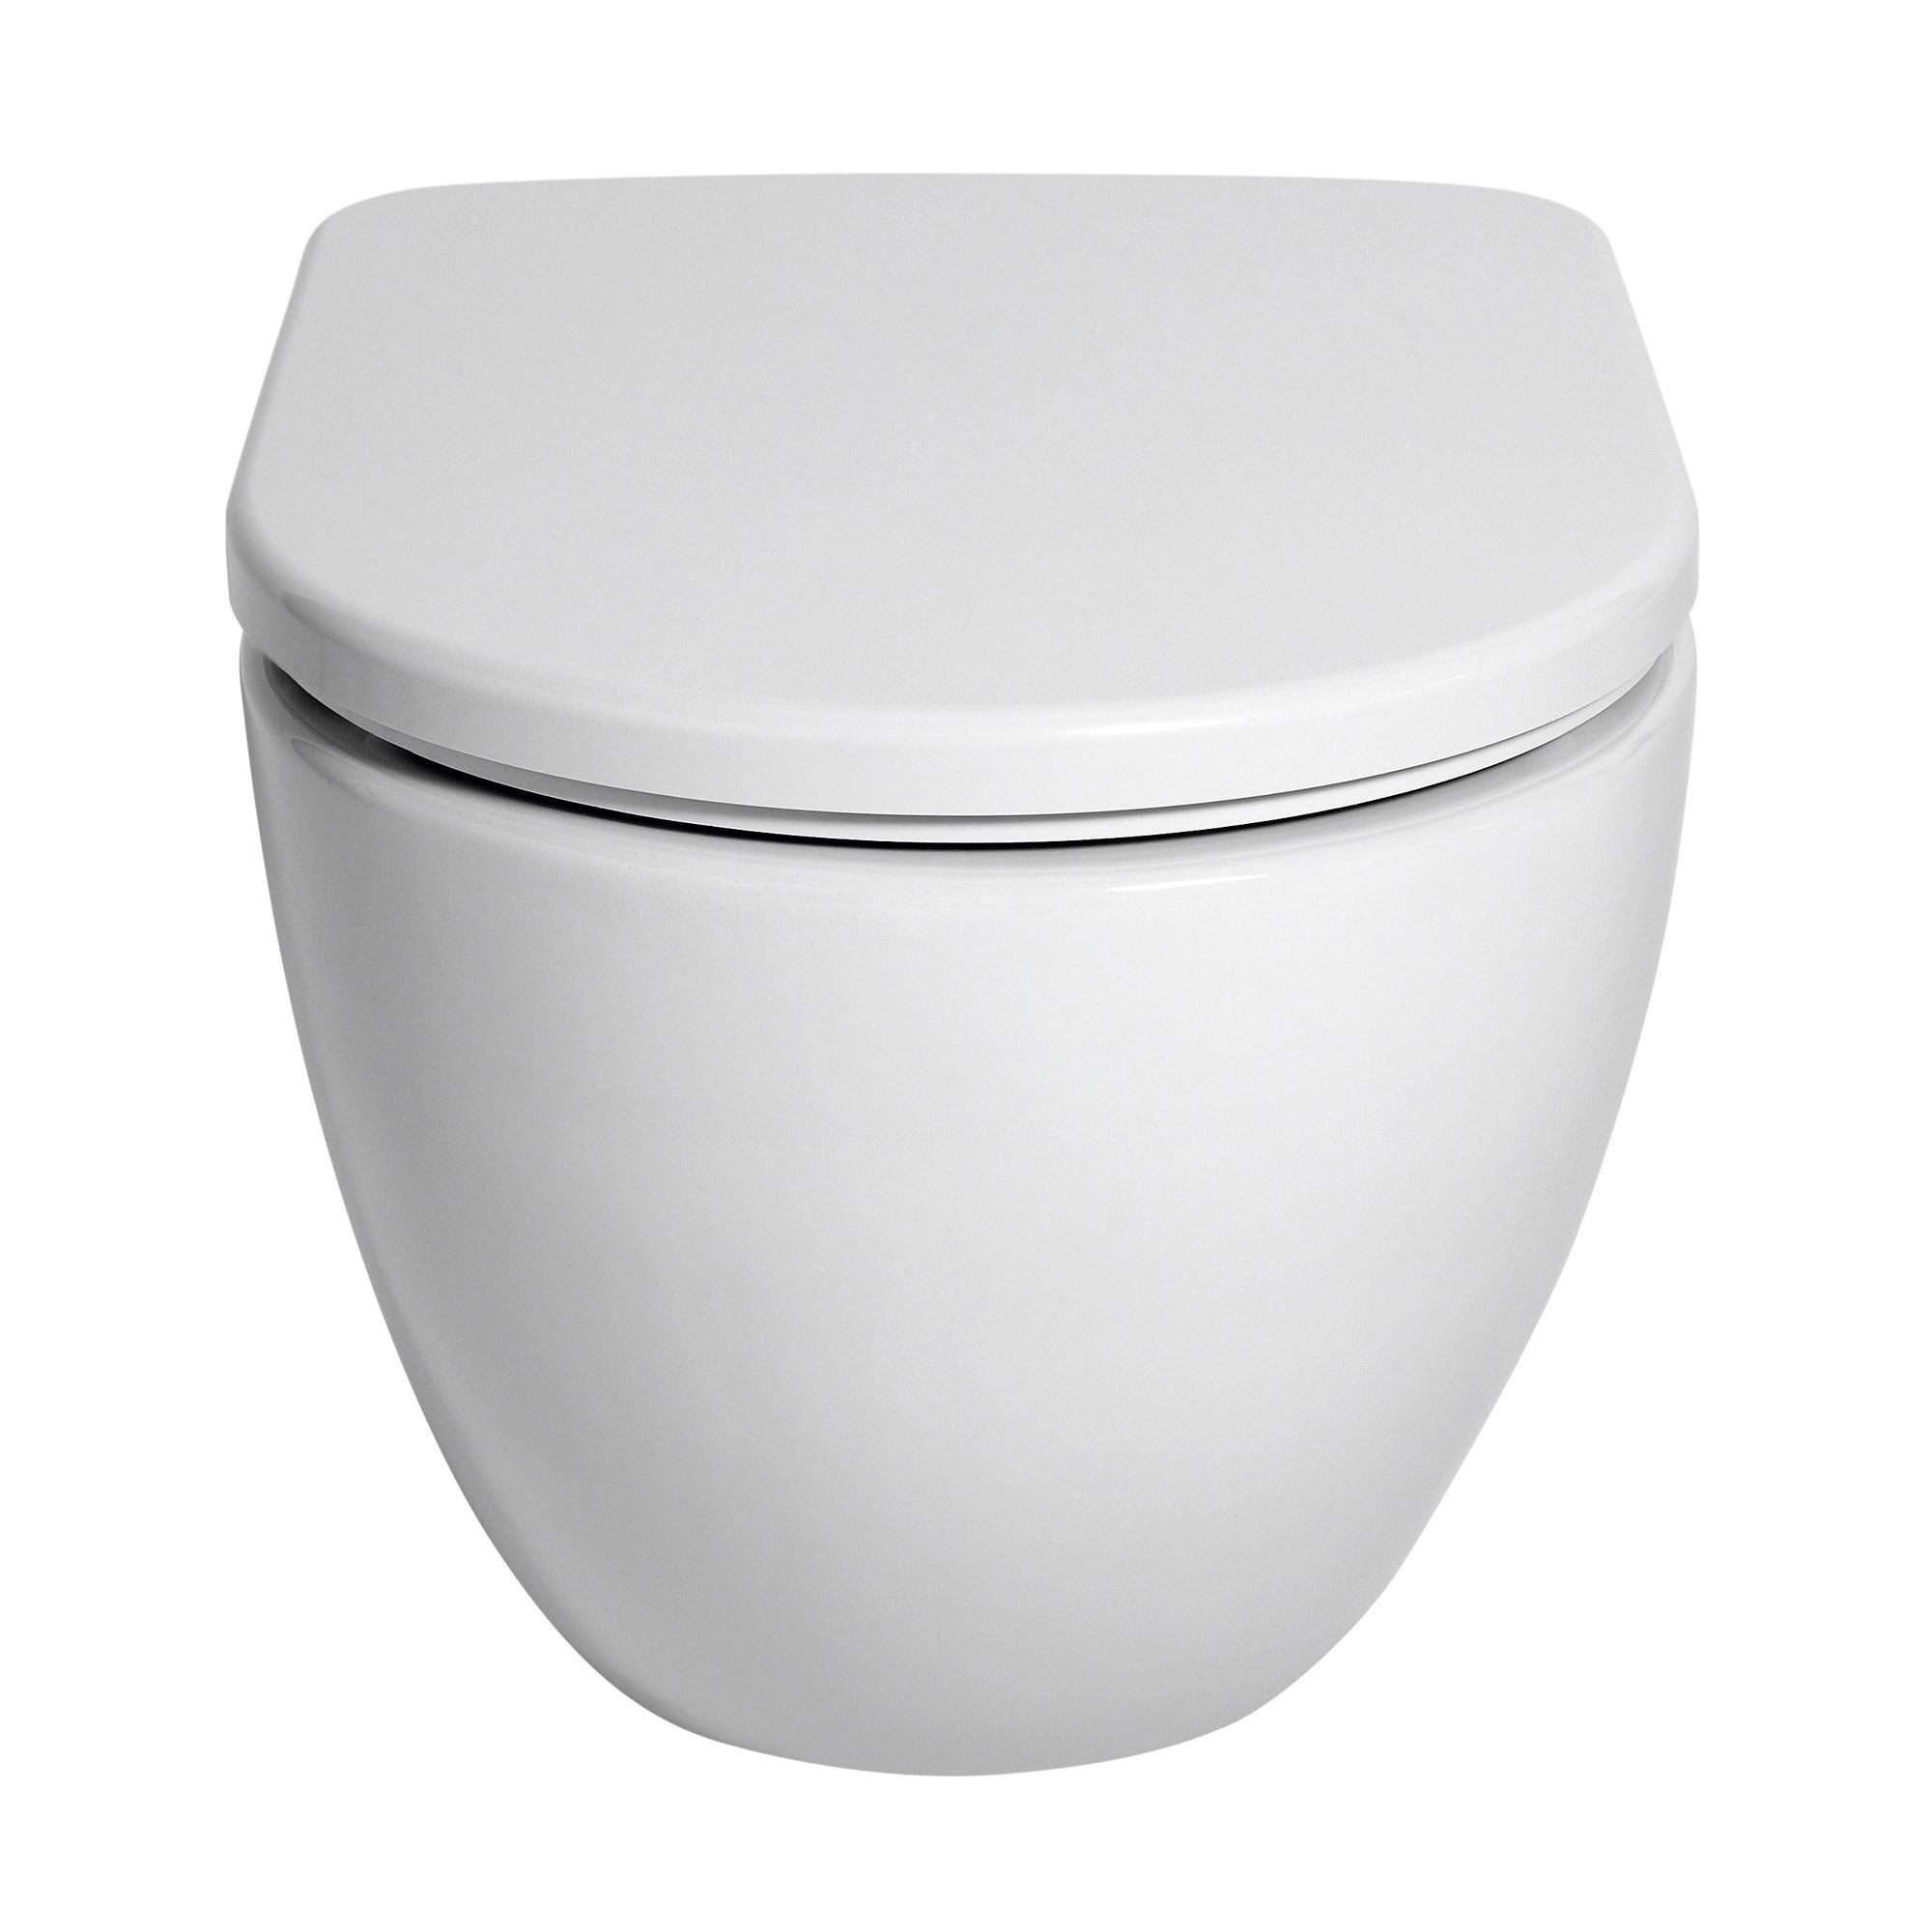 Cooke & Lewis Helena Wall hung Toilet with Soft close seat